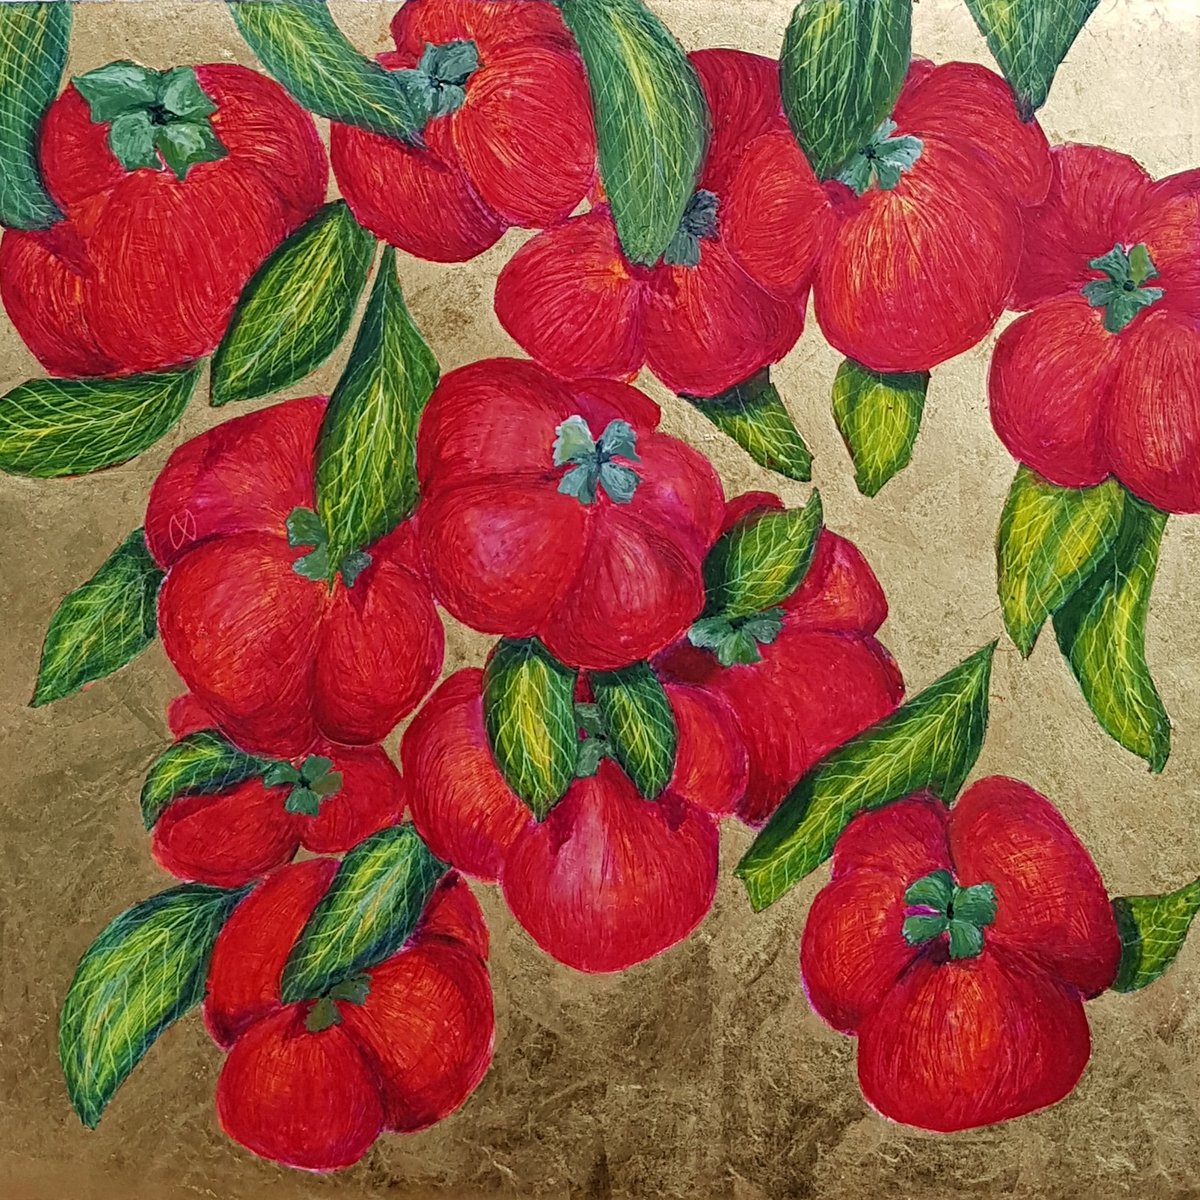 Vibrant painting of a Persimmon tree with juicy red fruit on gold leaf